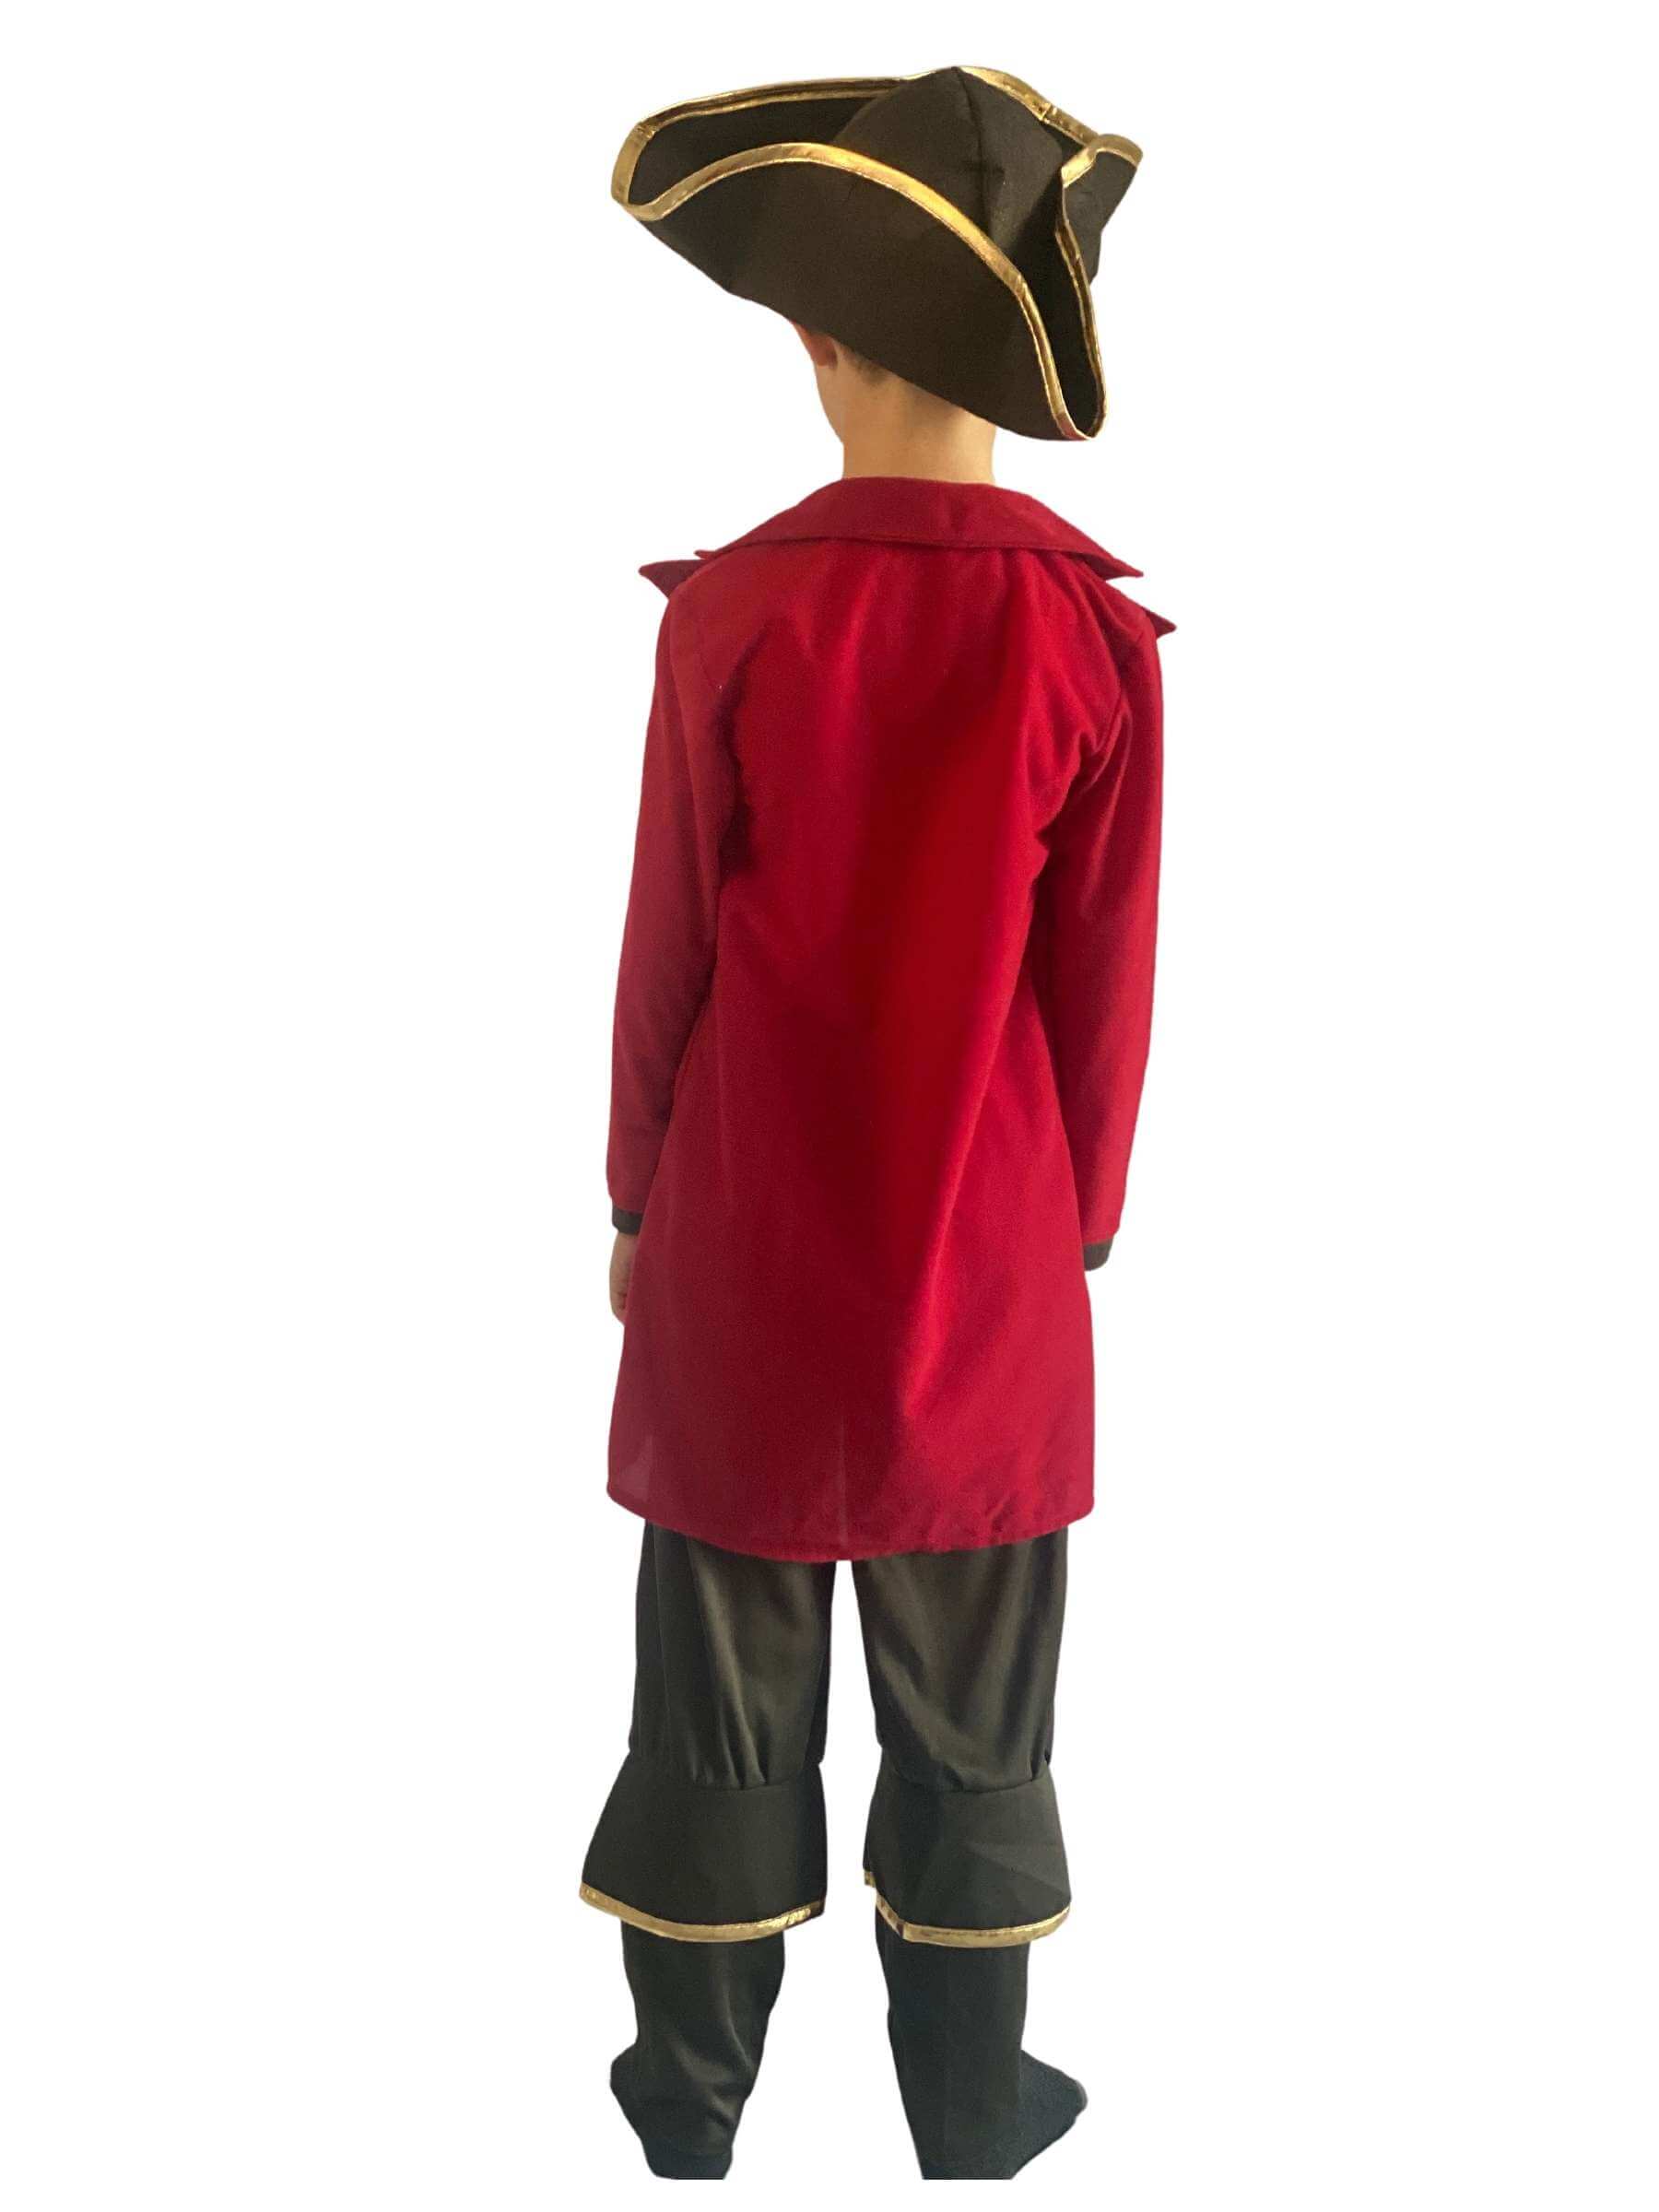 Admiral Adam Boys Pirate Costume - Once Upon A Dream 4-6 Years